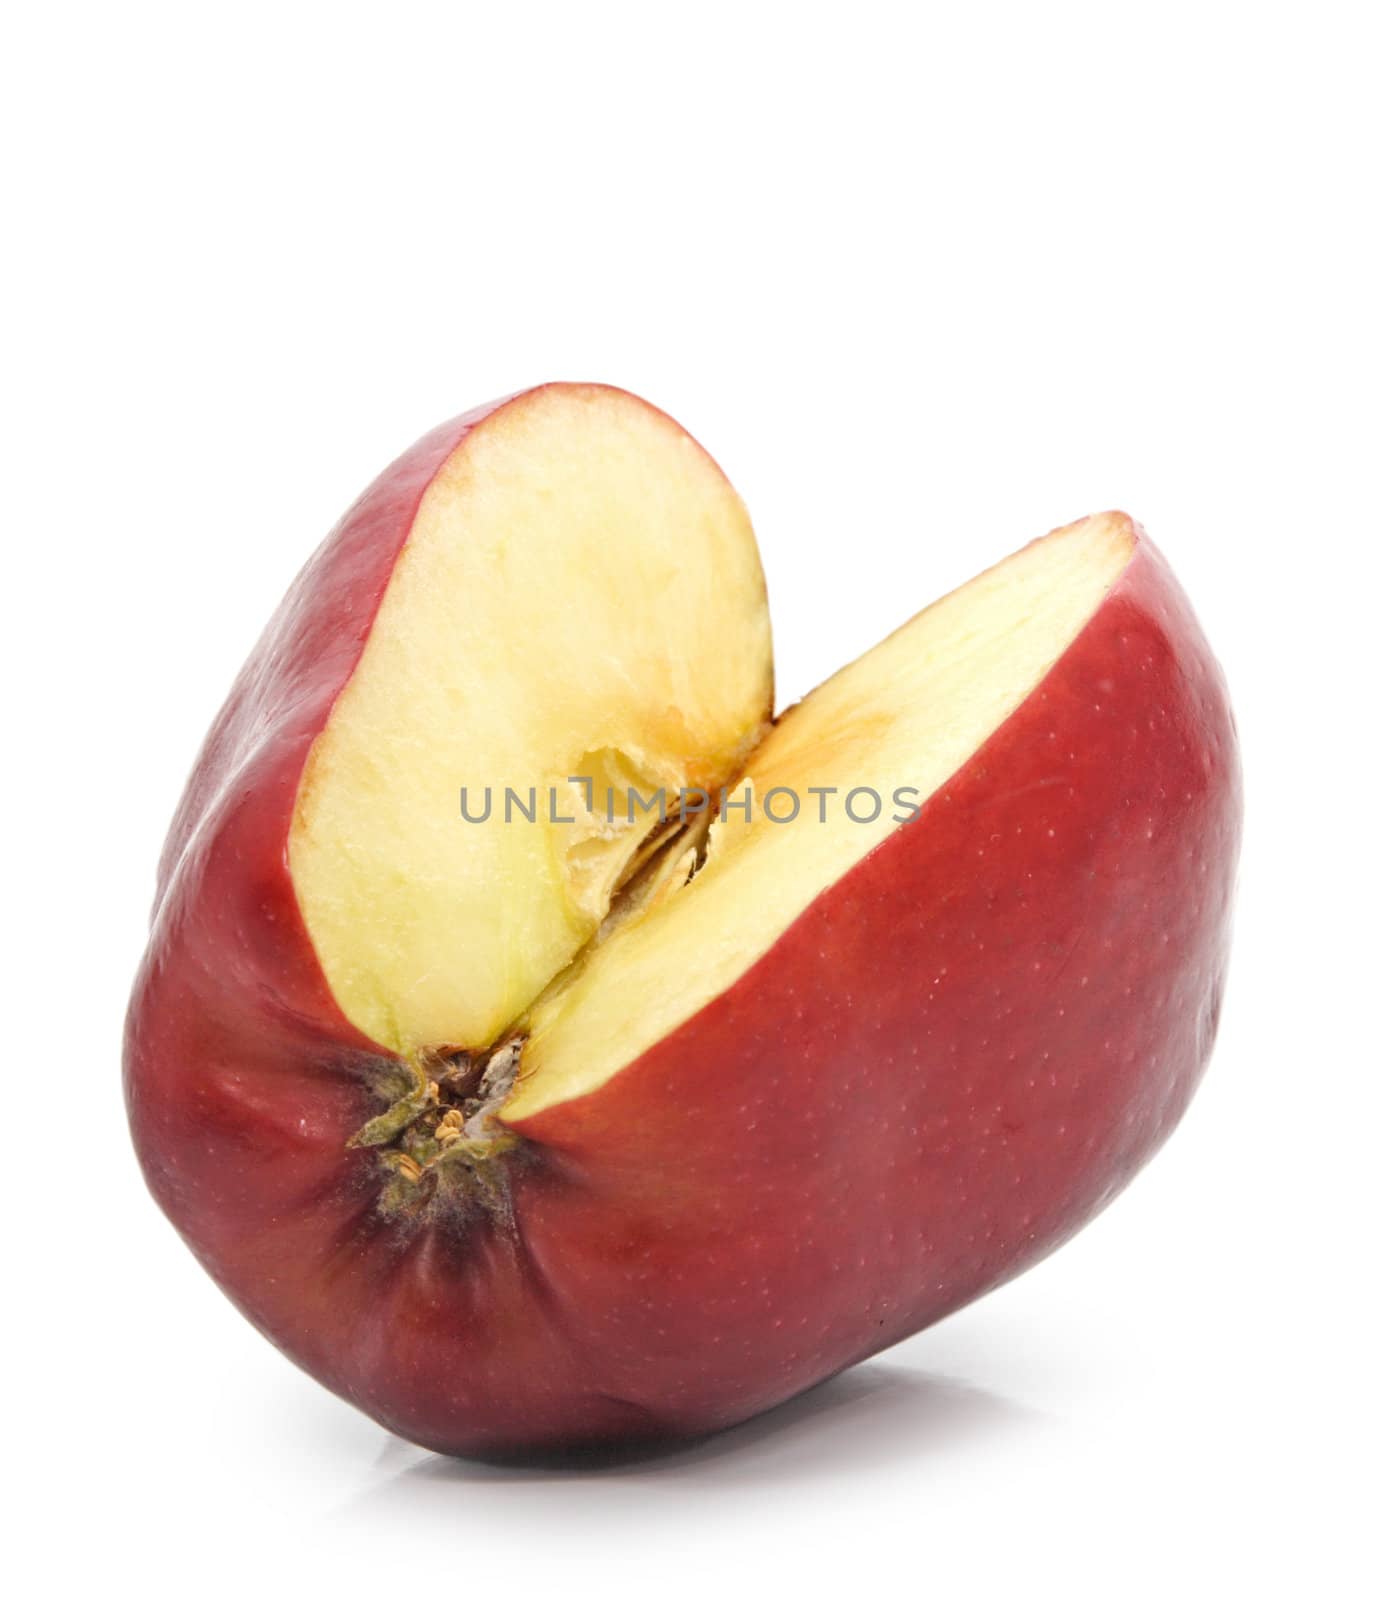 cutted delicious red apple isolated on white